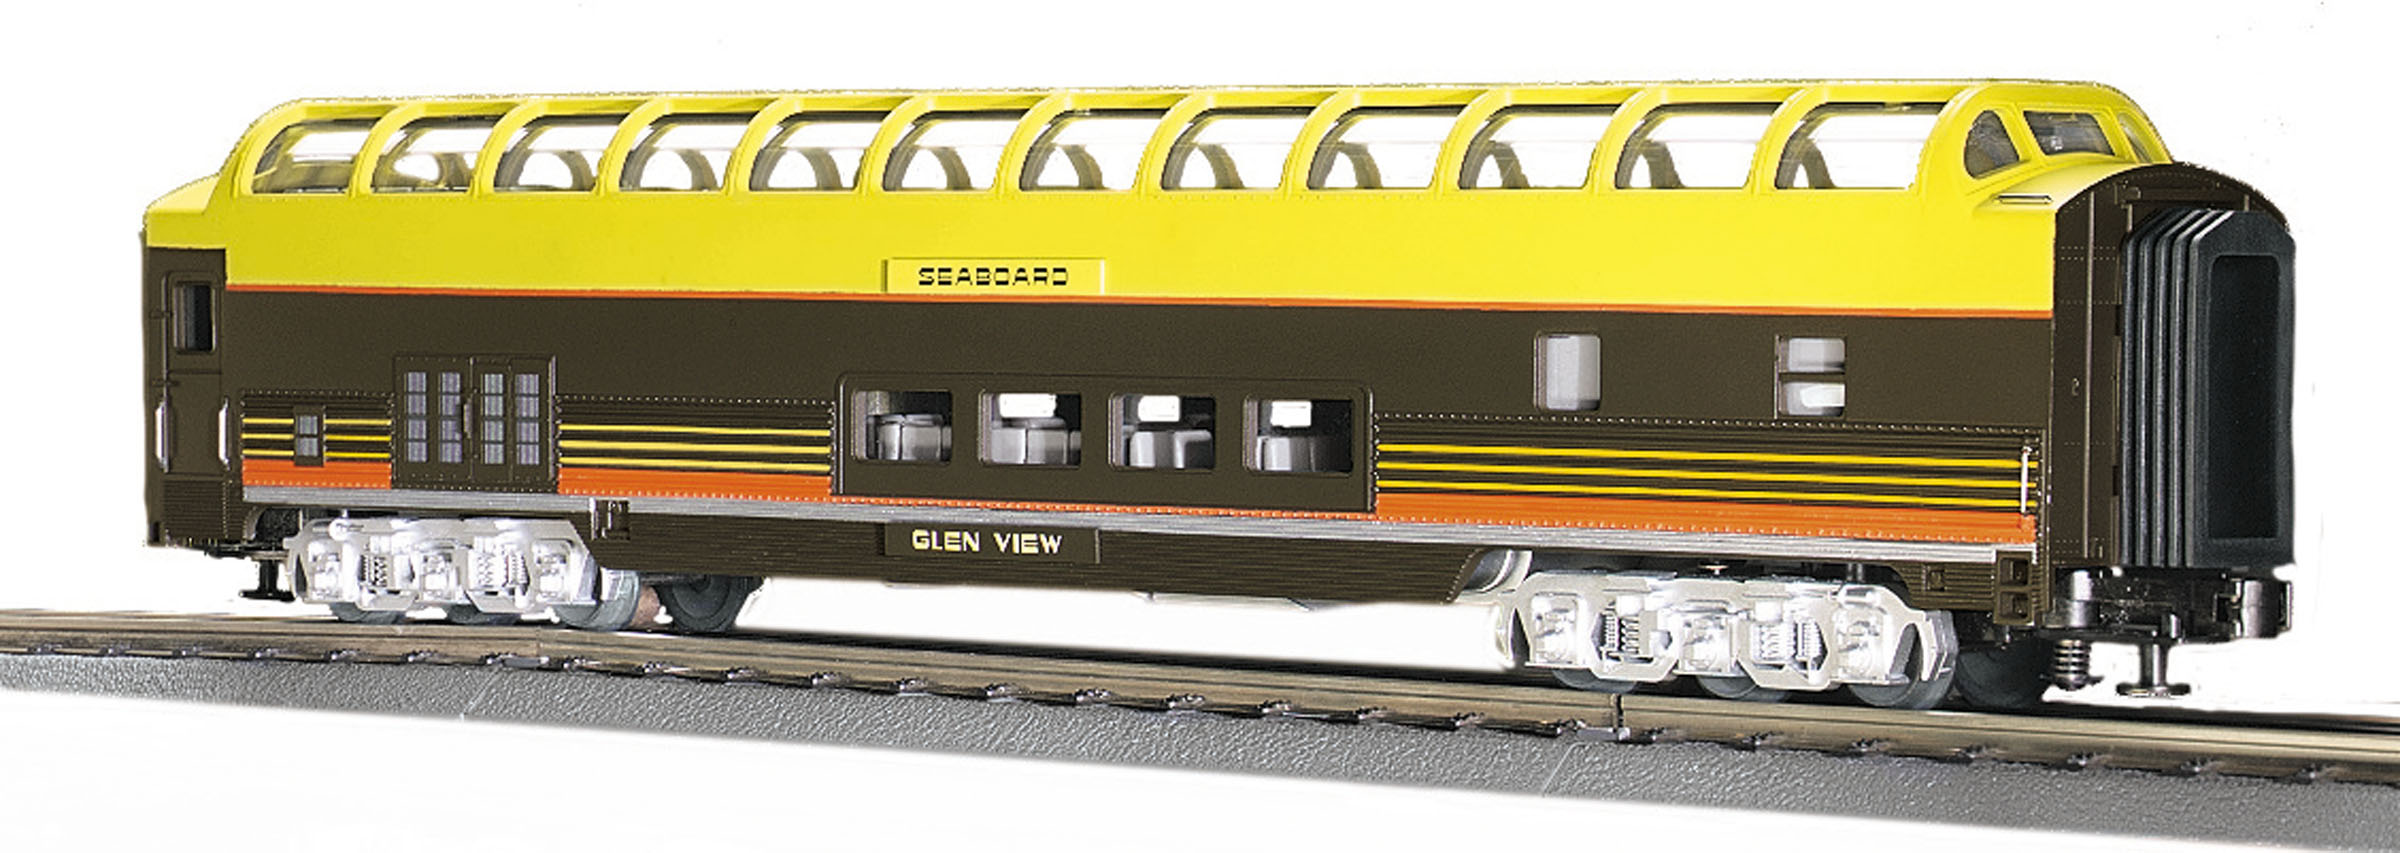 Details about   Mth Texas Special 70' ABS Full Length Vista Dome Ribbed Passenger Car 20-6729 